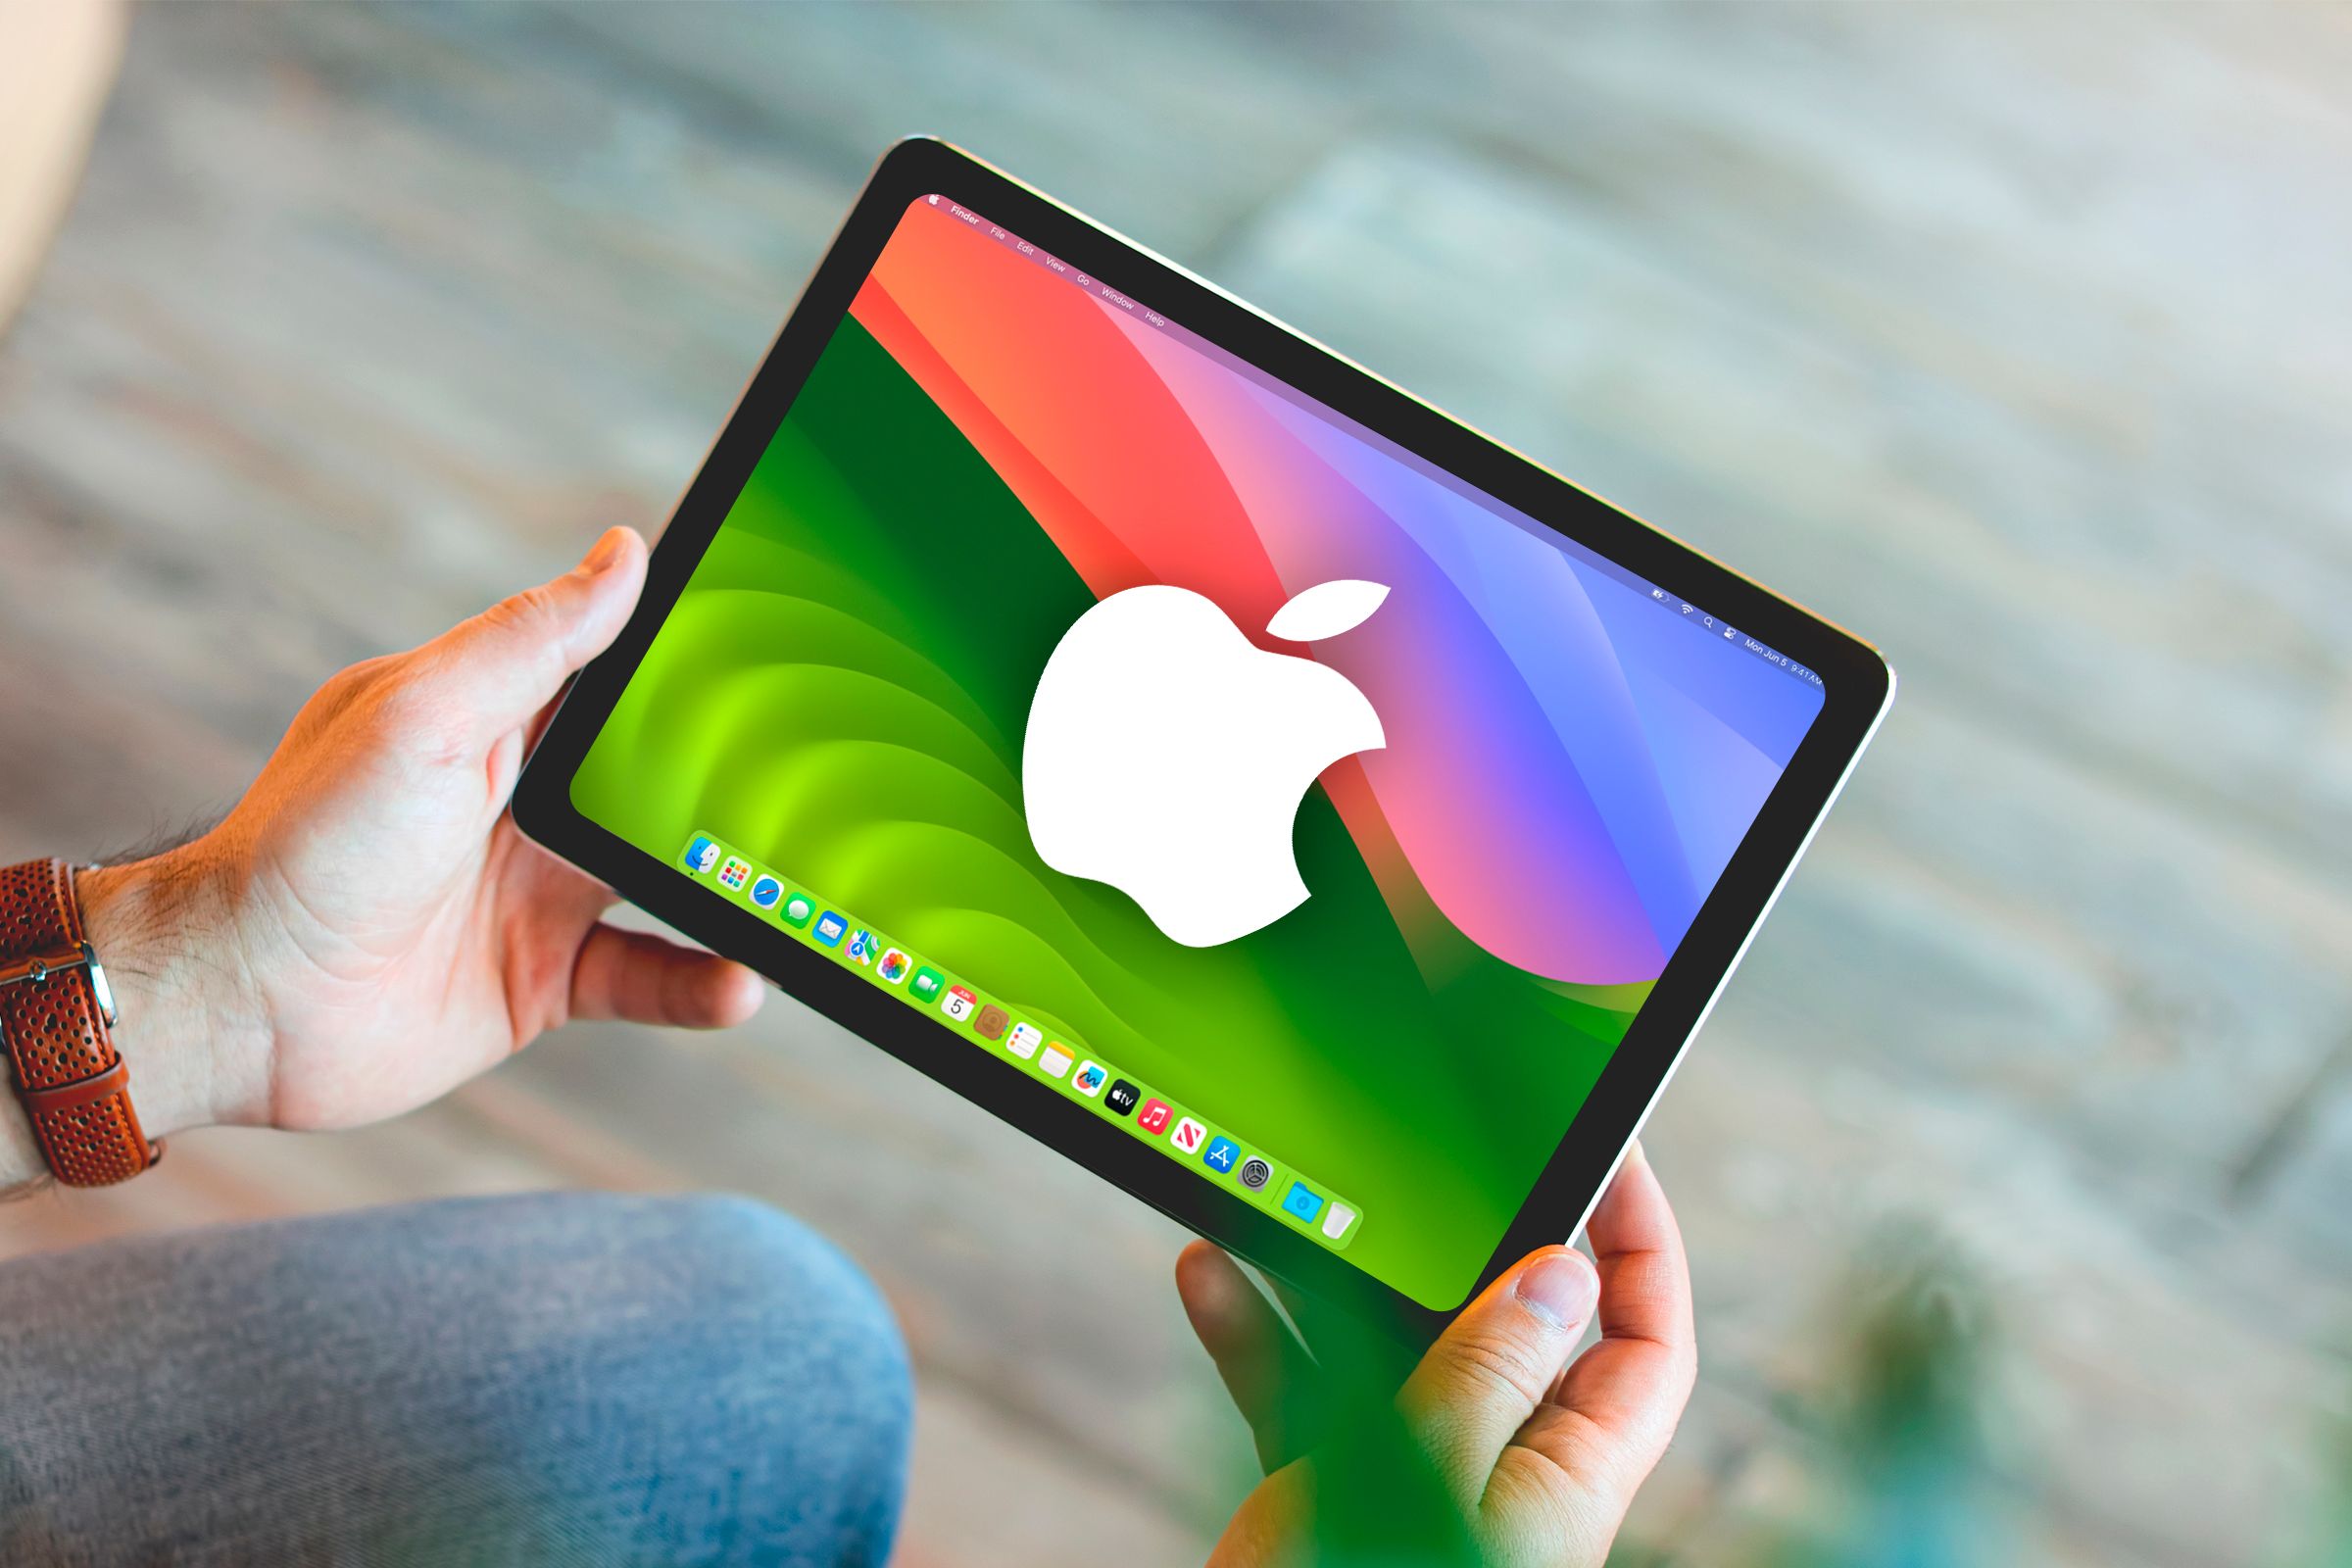 A hand holding an iPad running MacOs and the Apple logo on screen